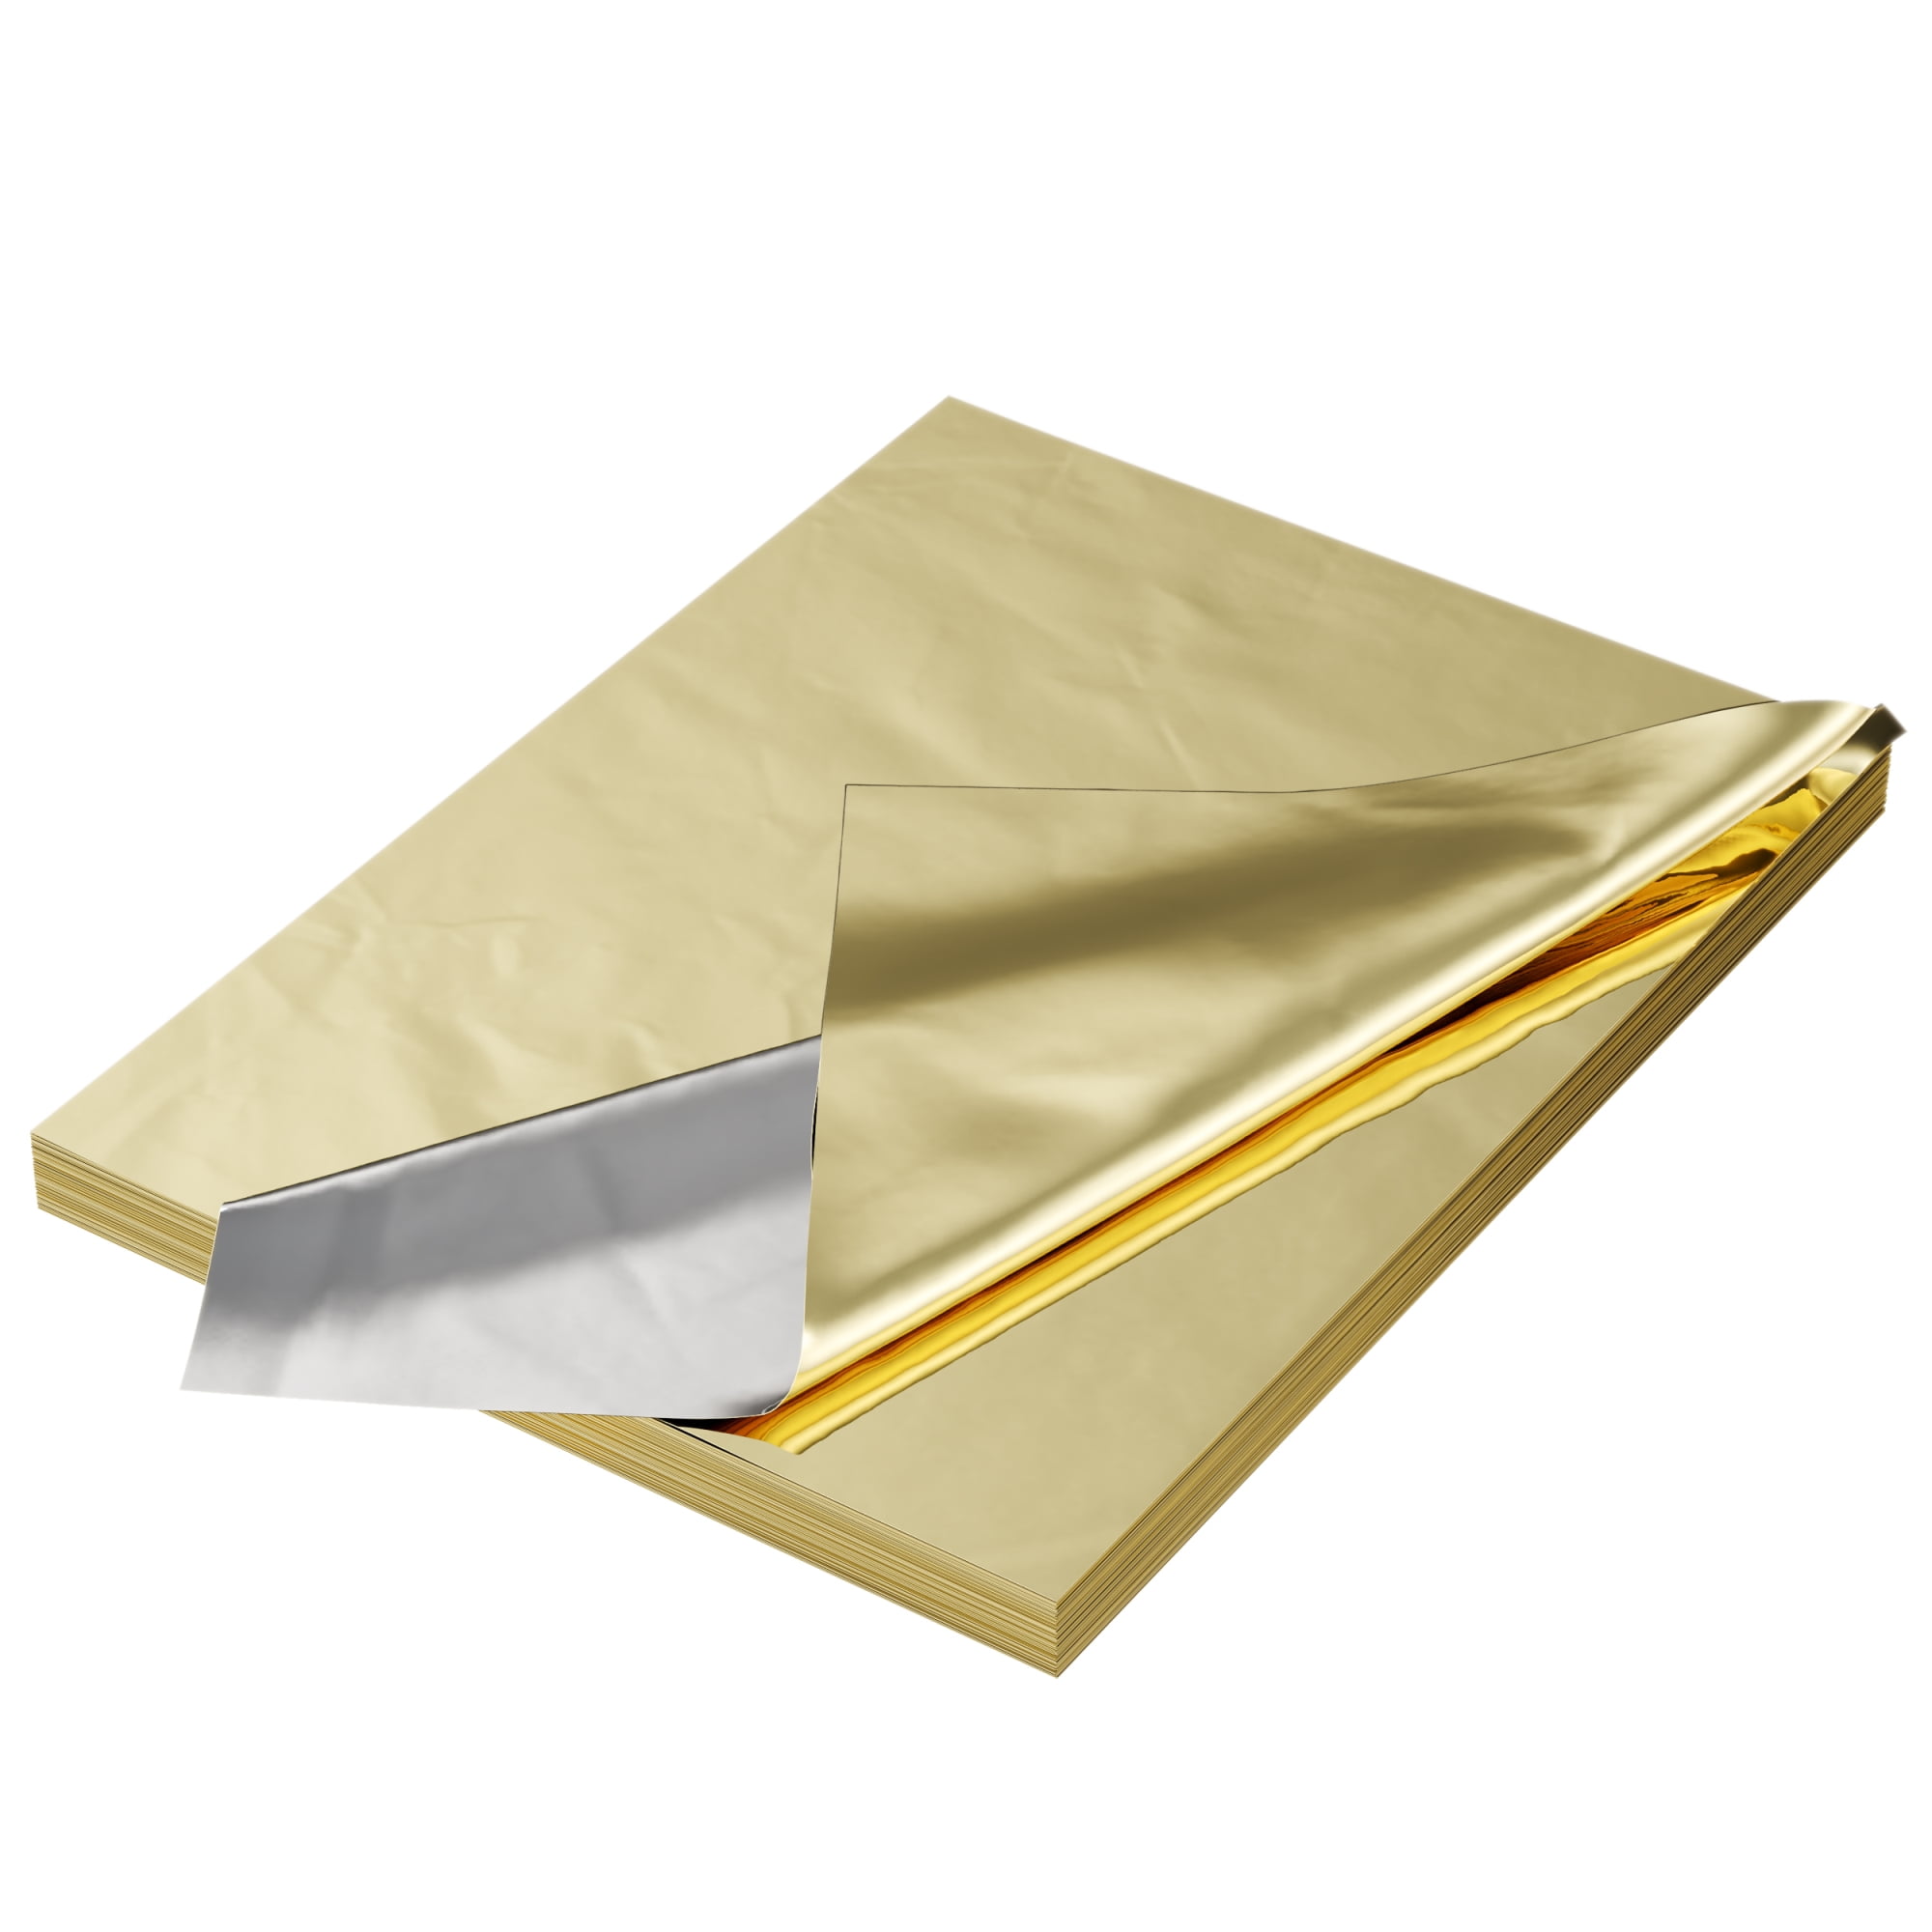 480 Sheets - 15 x 20 inch Yellow Packing Paper for Gift Wrapping